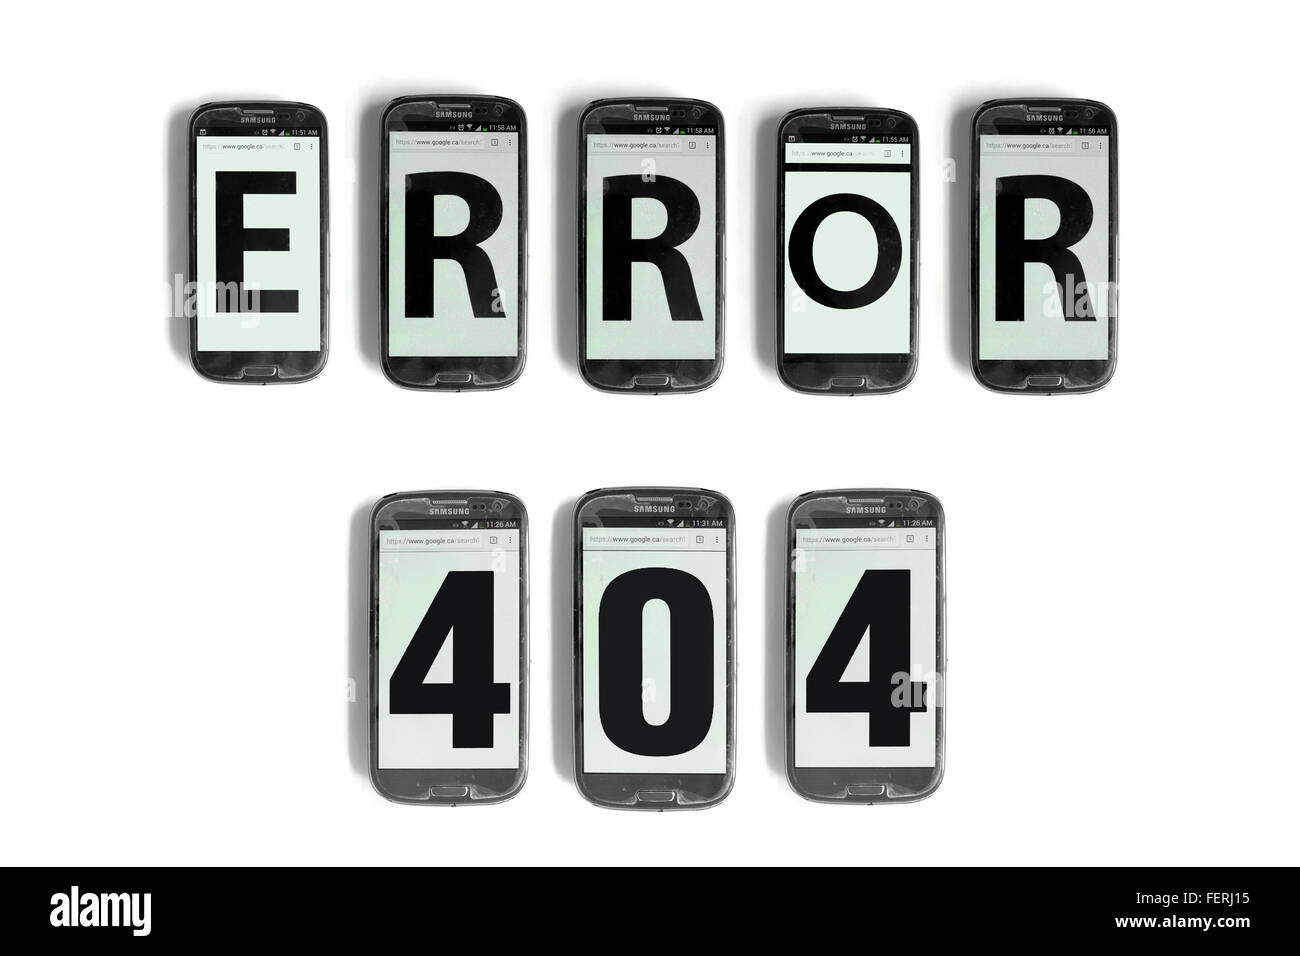 Error 404 on the screens of smartphones photographed against a white background. Stock Photo